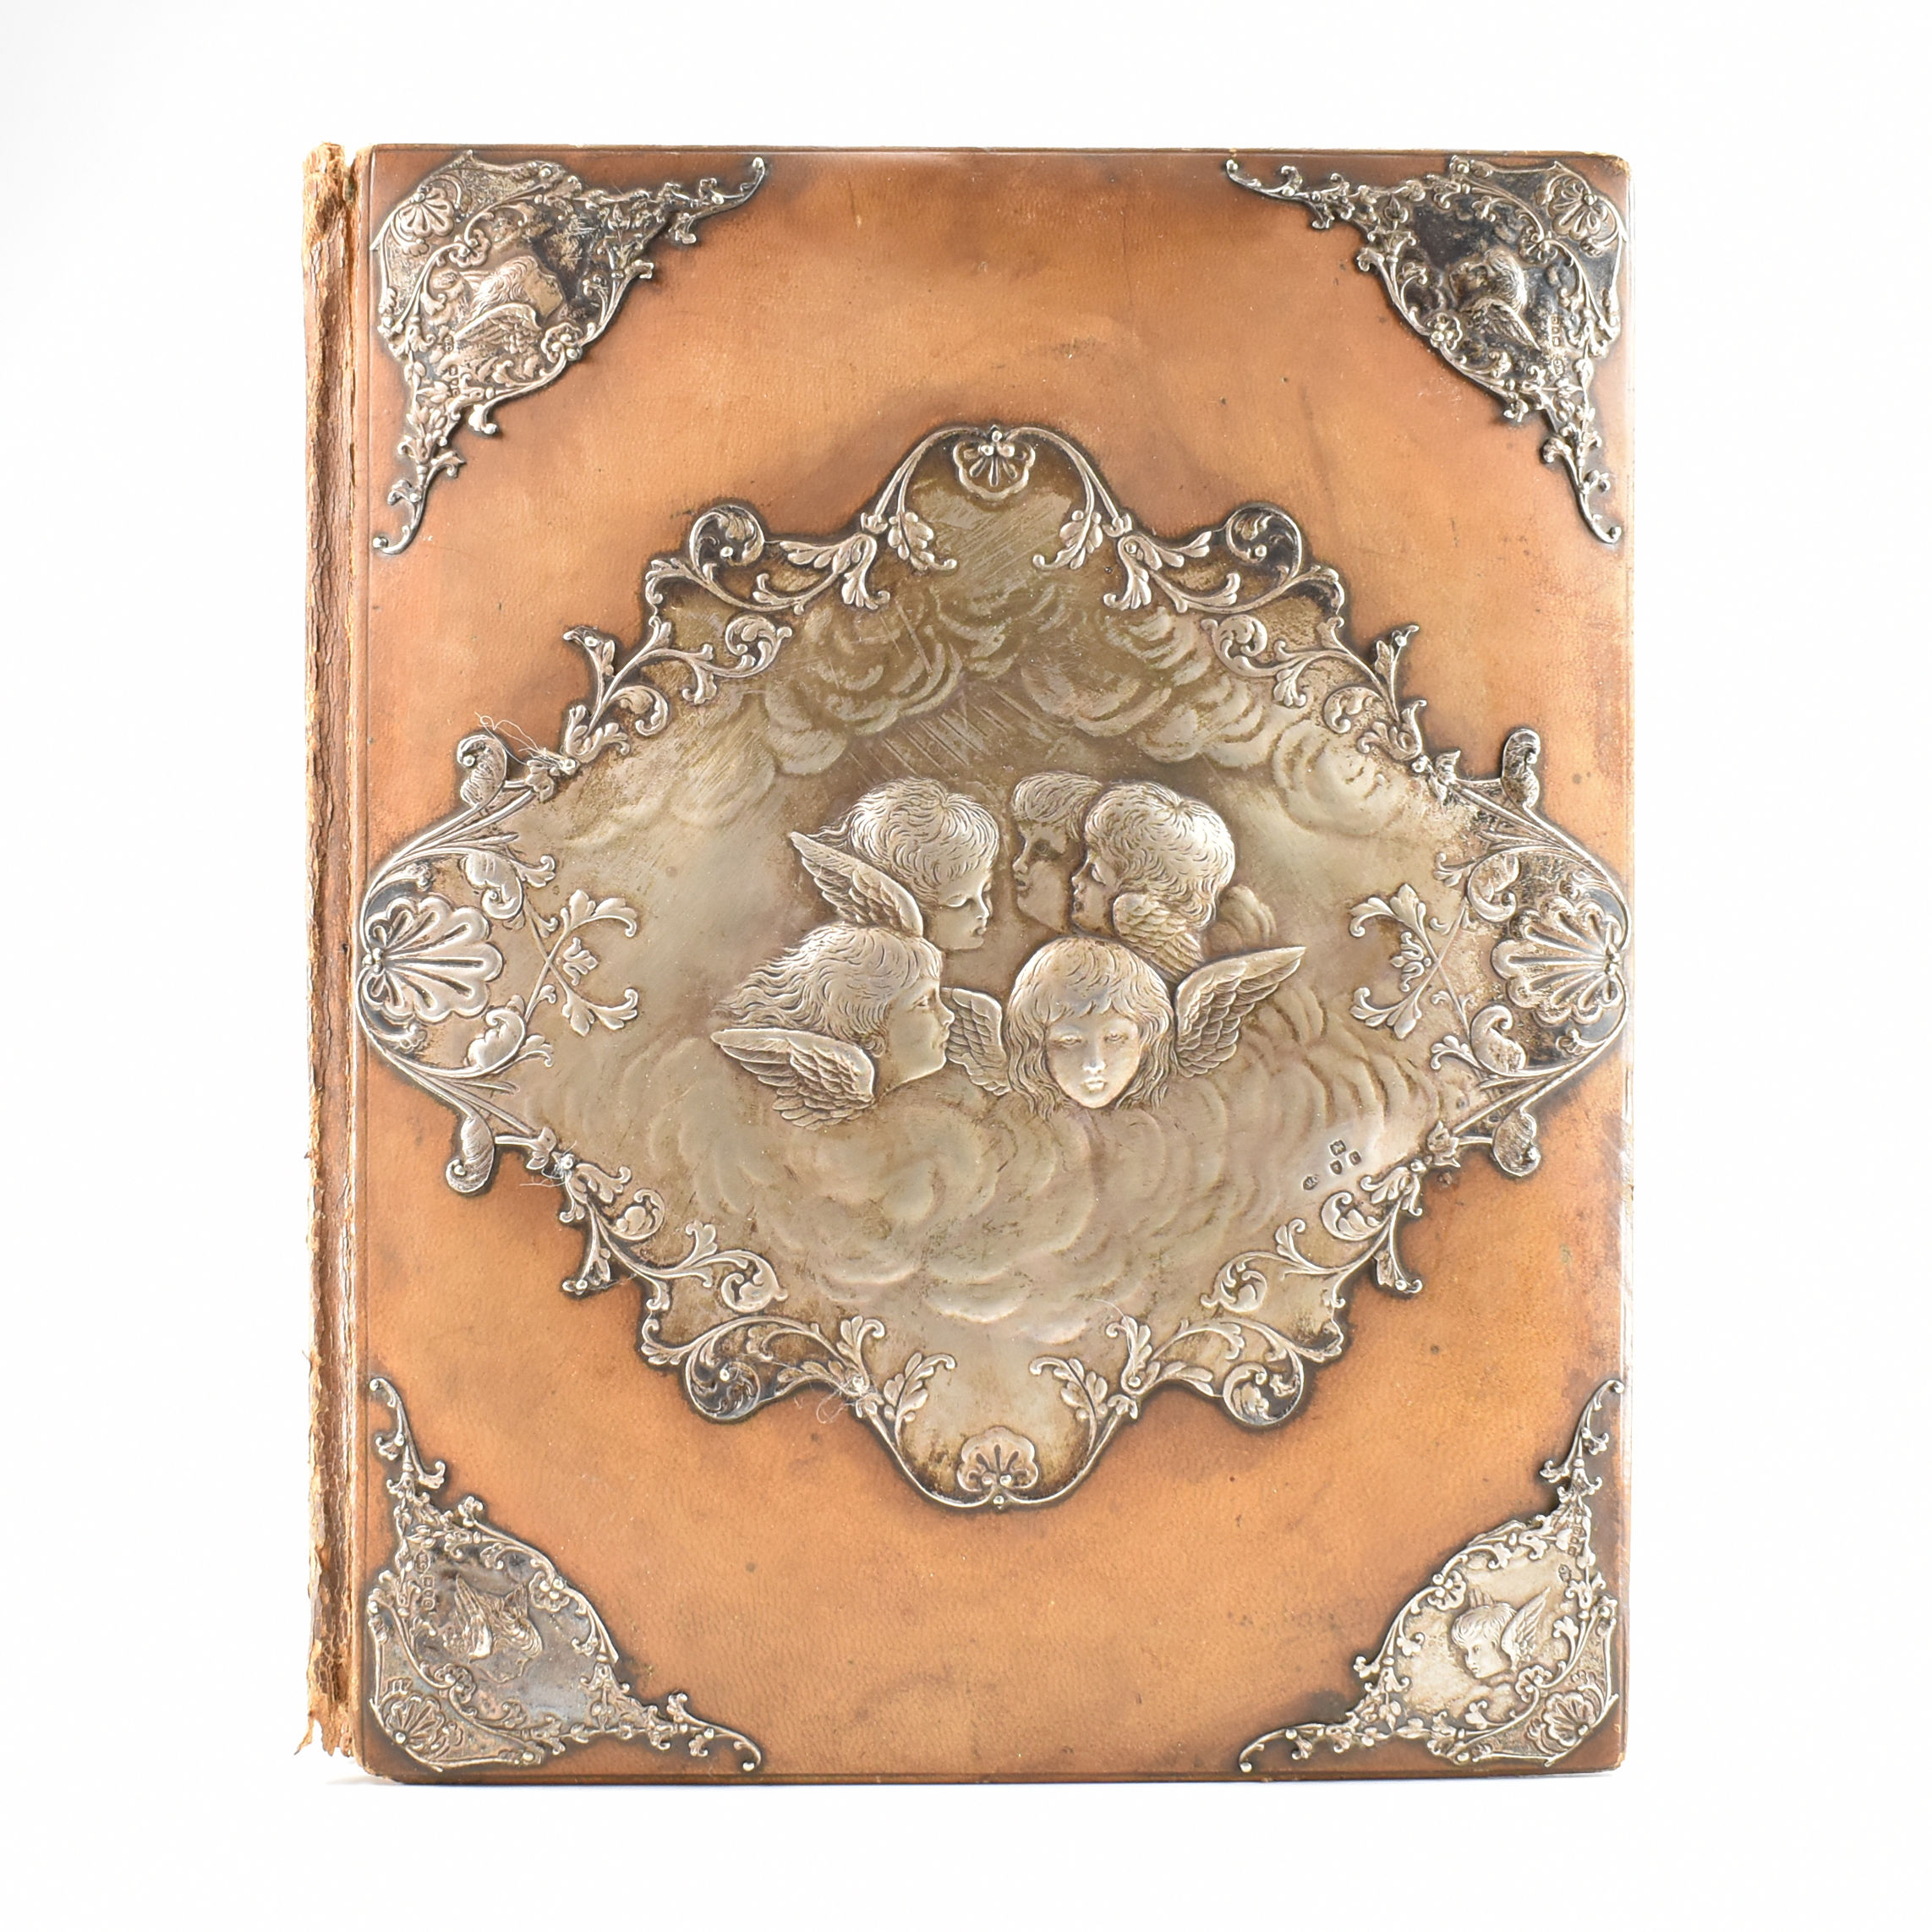 VICTORIAN PHOTOGRAPH ALBUM COVER WITH SILVER PANELING